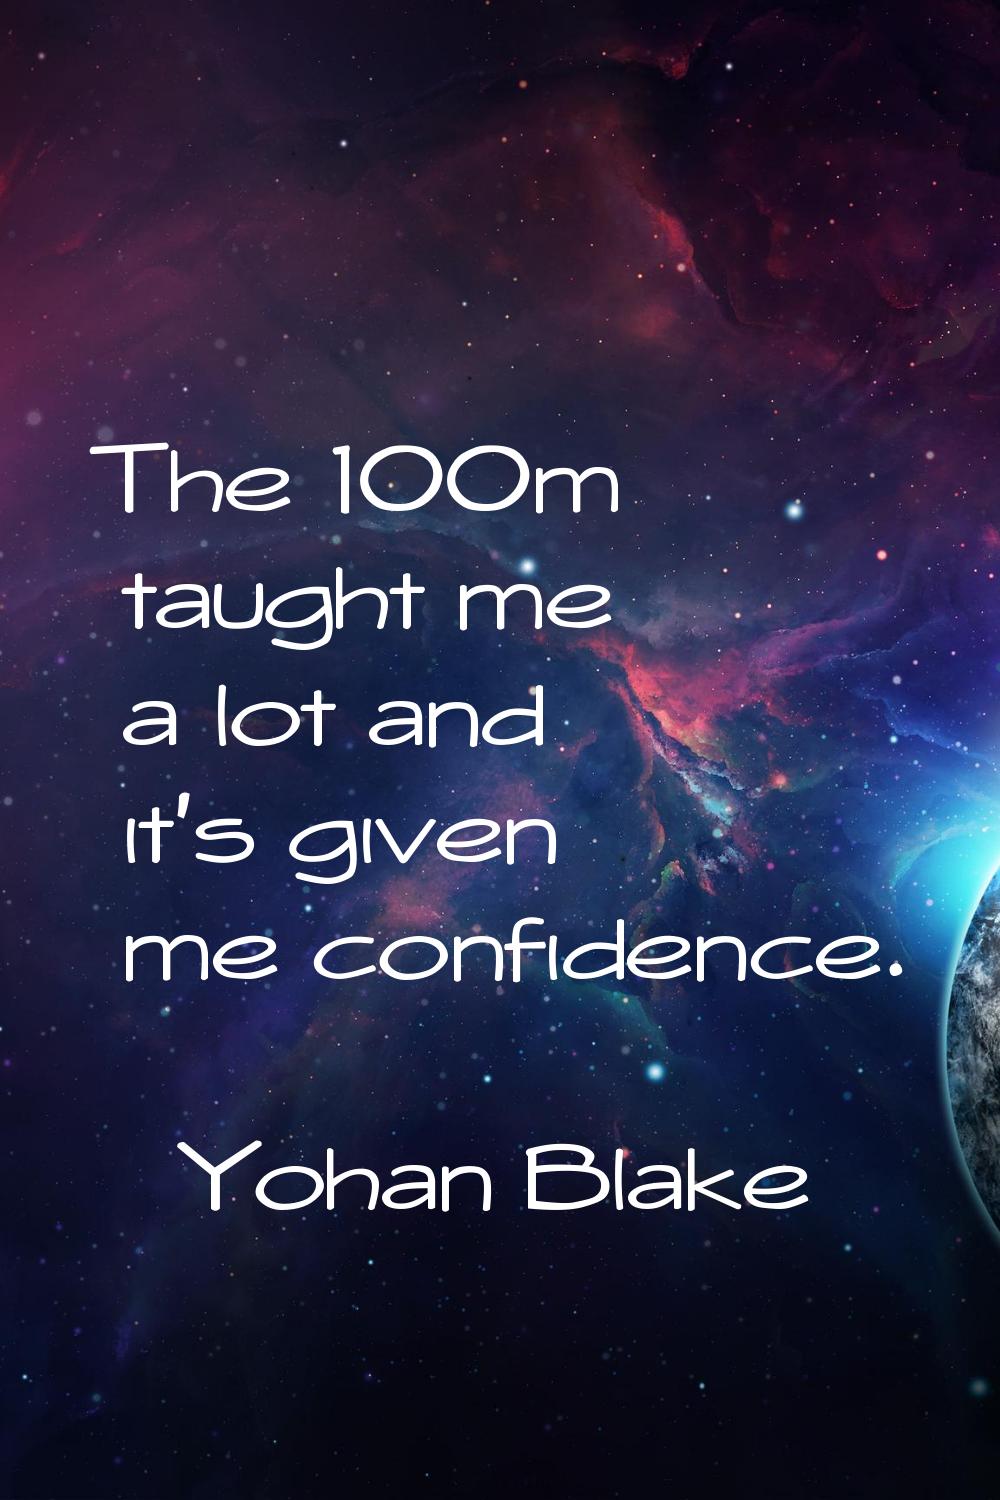 The 100m taught me a lot and it's given me confidence.